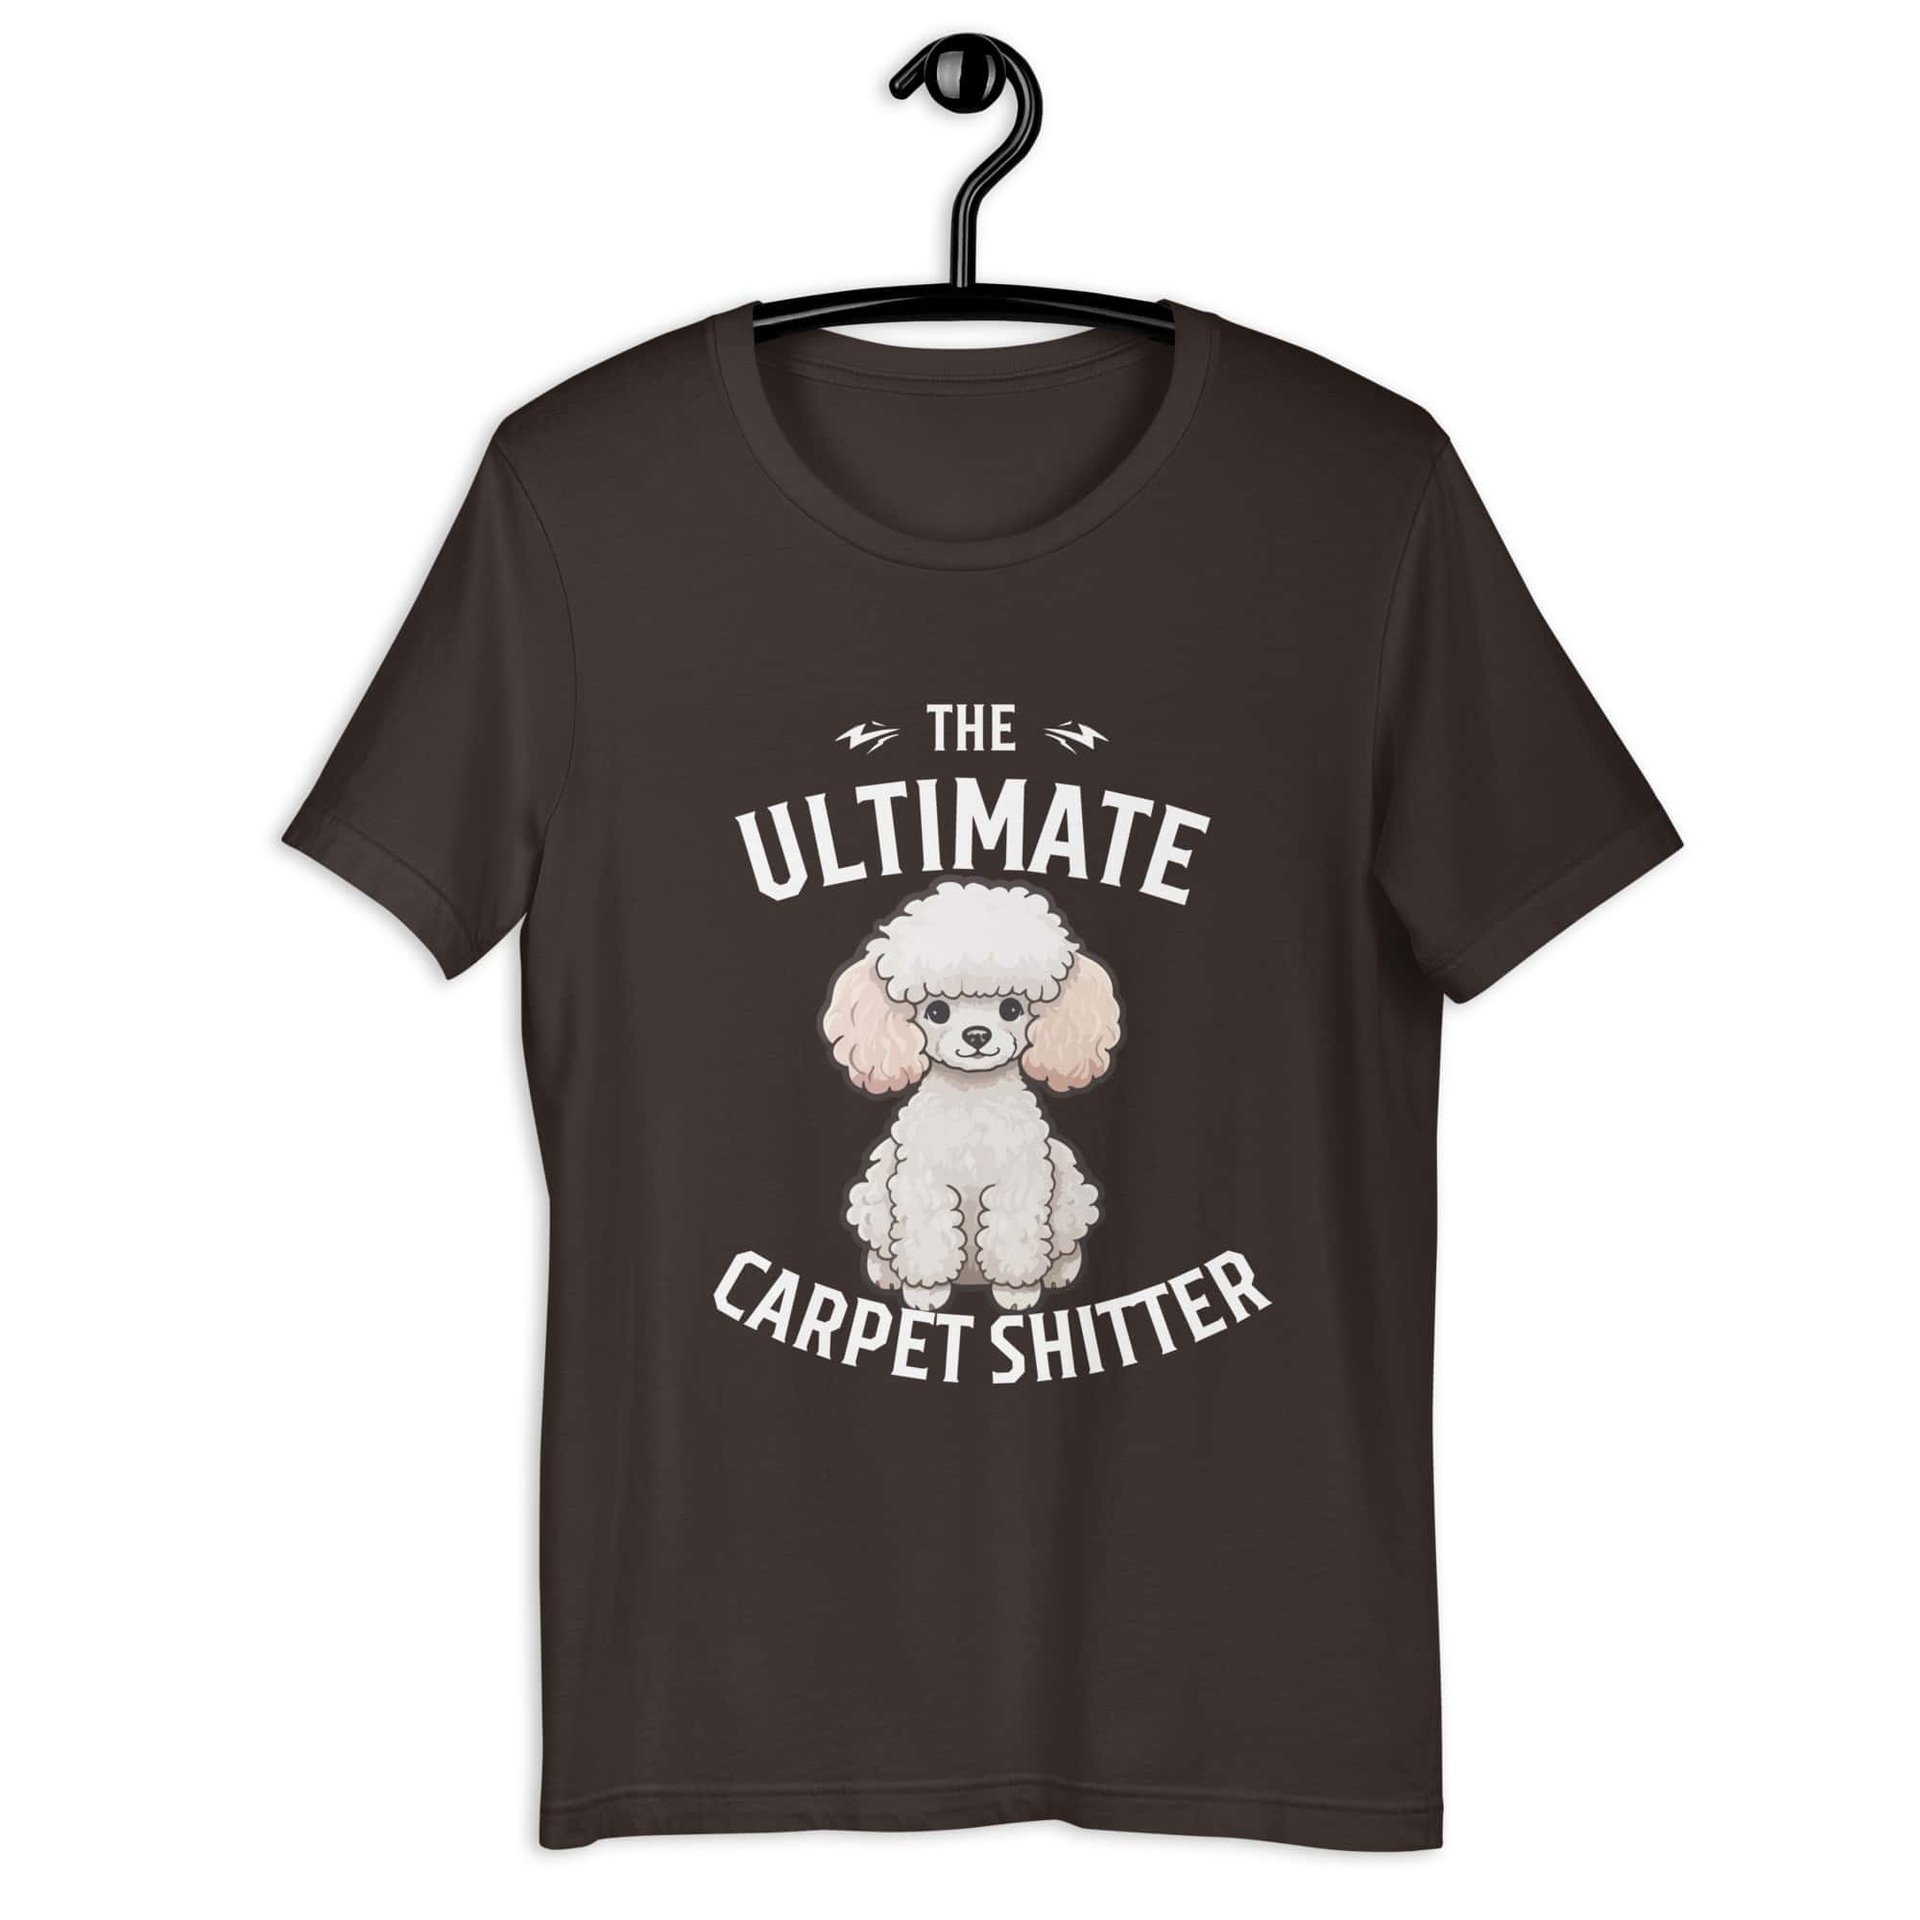 The Ultimate Carpet Shitter Funny Poodle Unisex T-Shirt gray